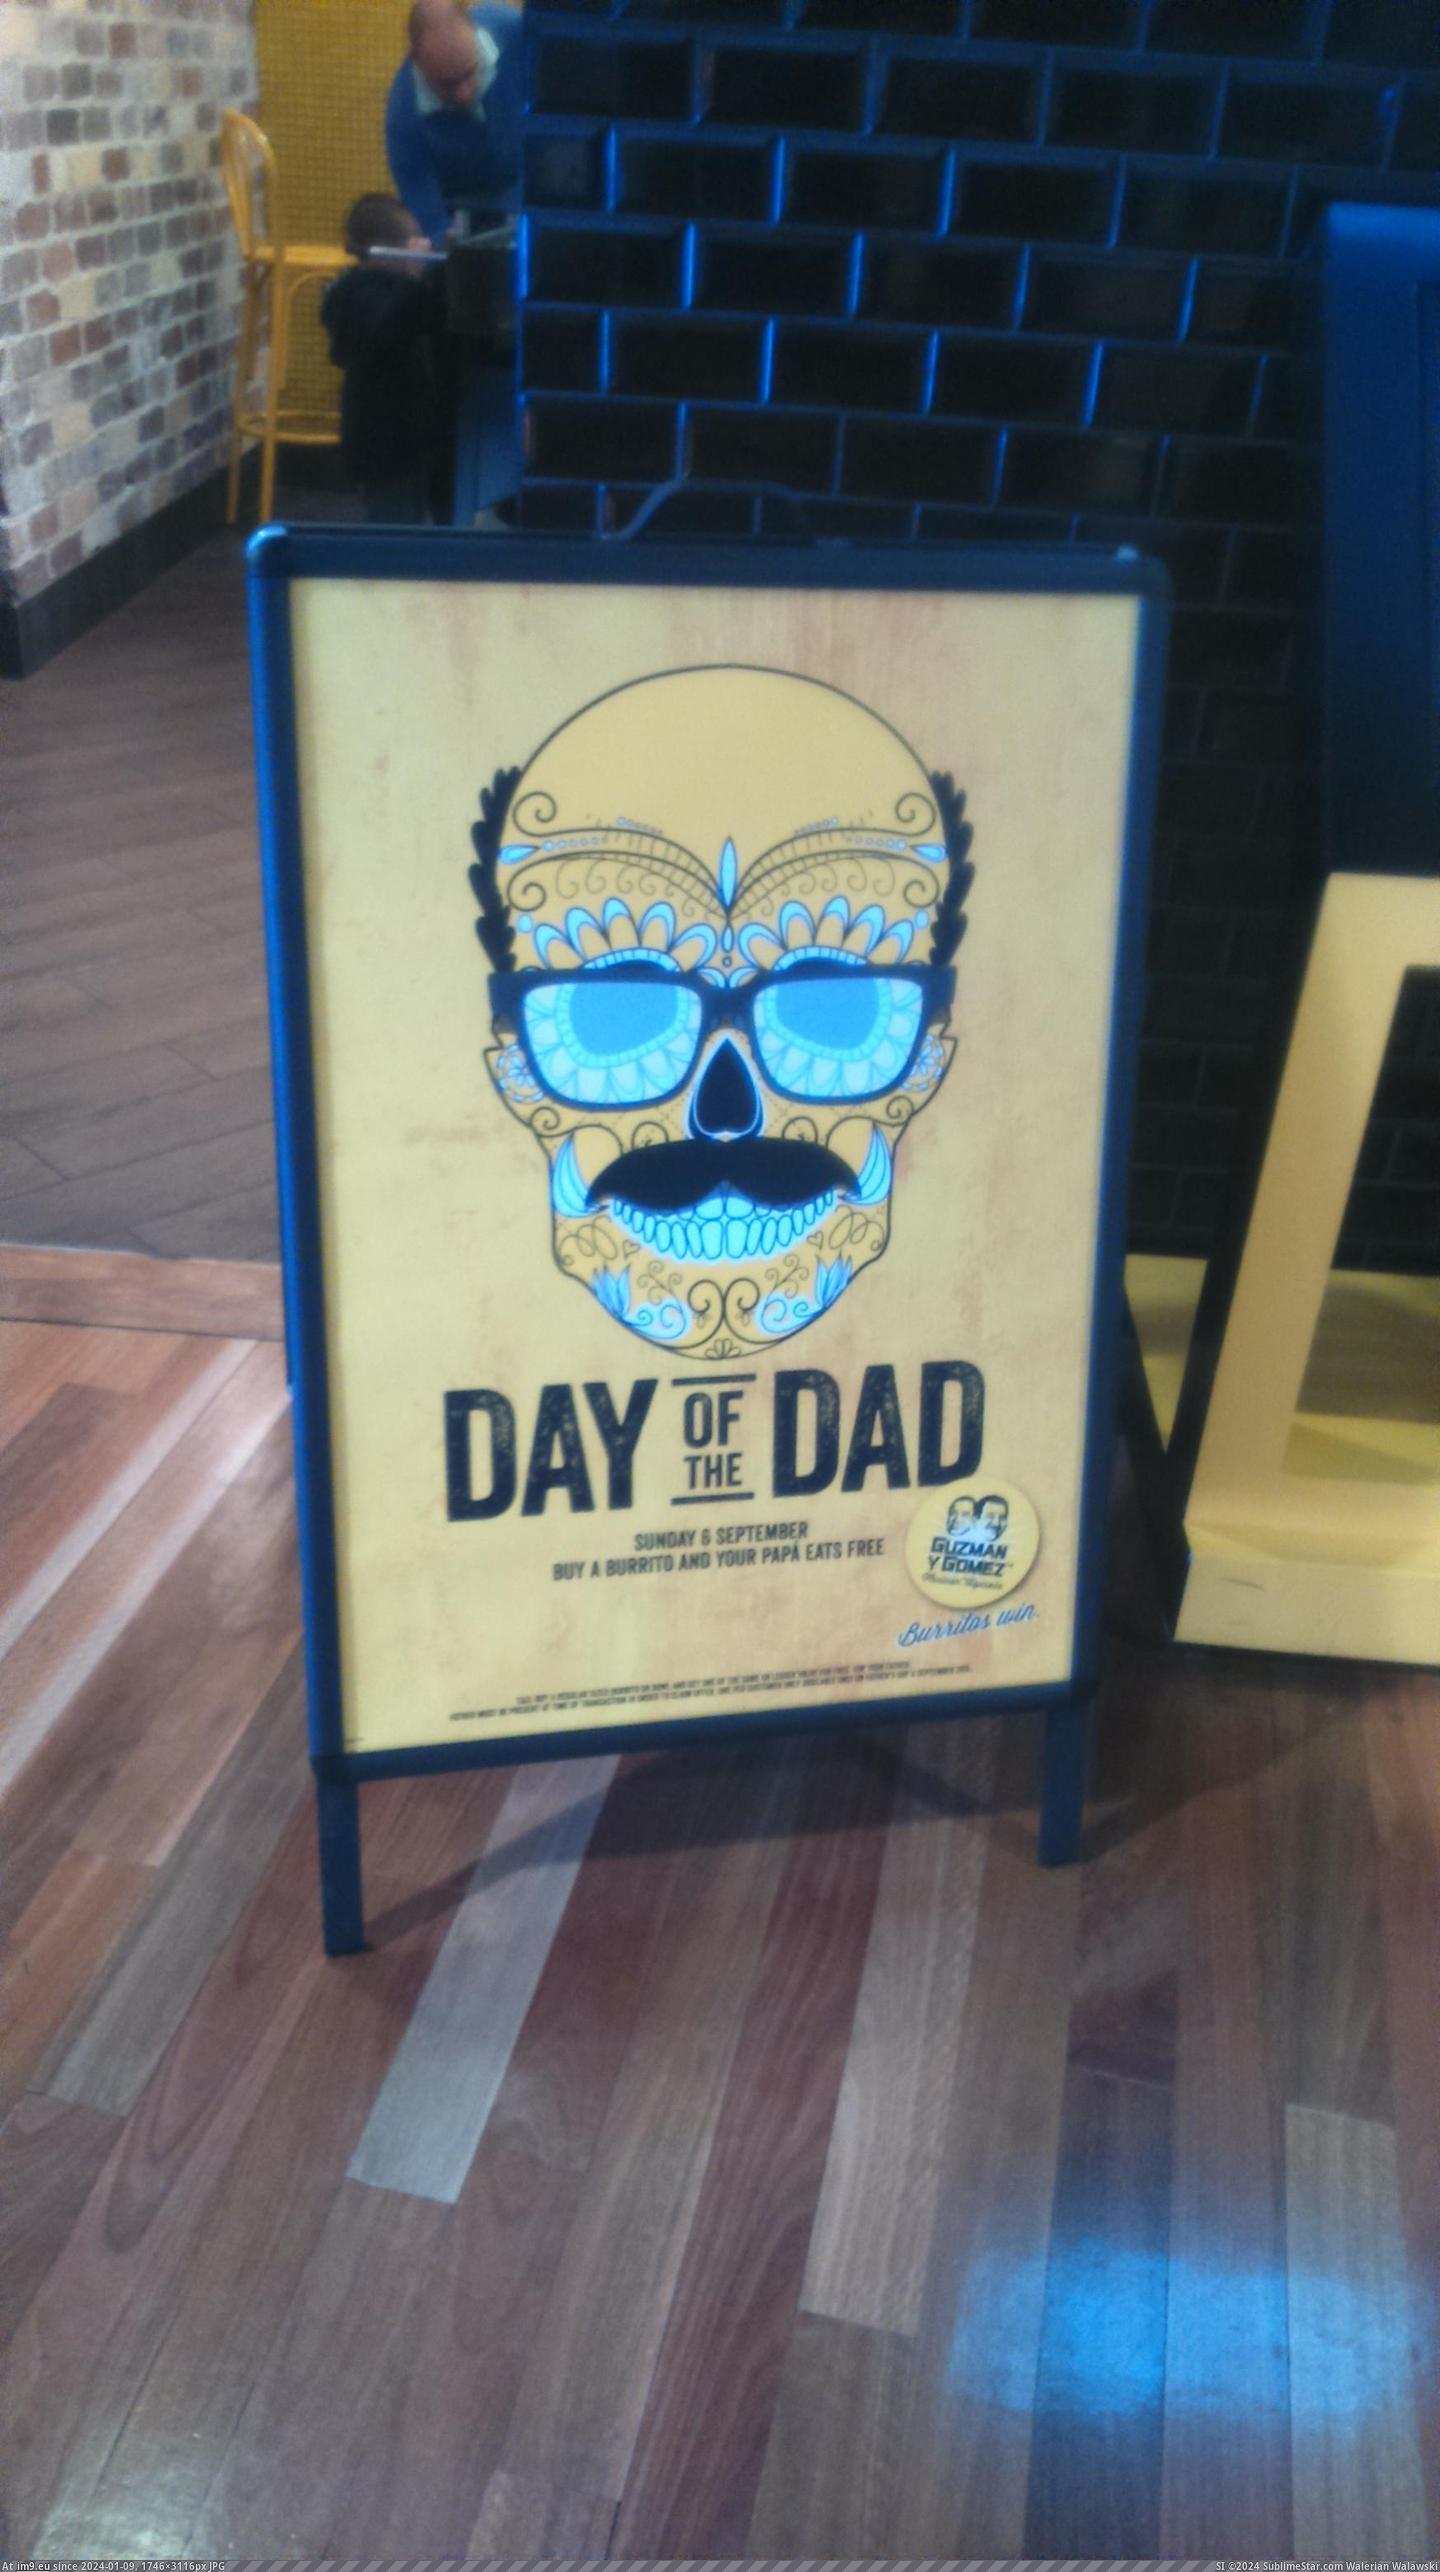 [Mildlyinteresting] The Mexican restaurant celebrated Day of the Dad rather than Father's Day (in My r/MILDLYINTERESTING favs)